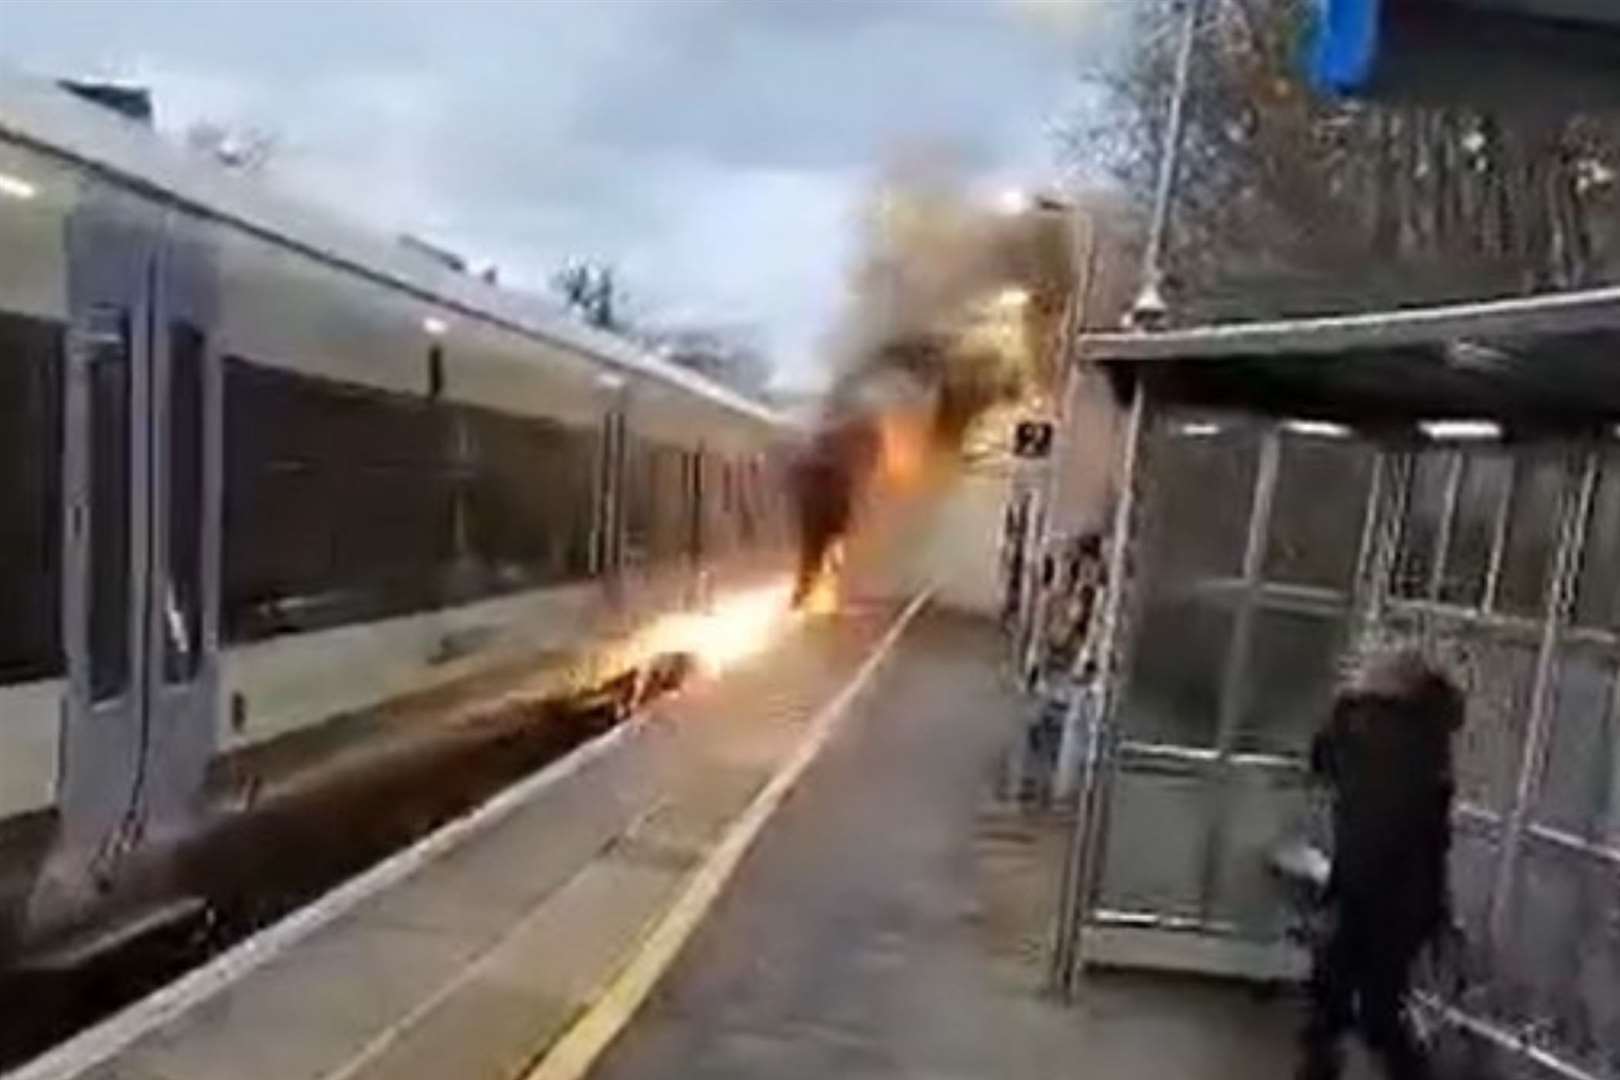 The train fire at West Malling railway station. Picture: Alex Baker